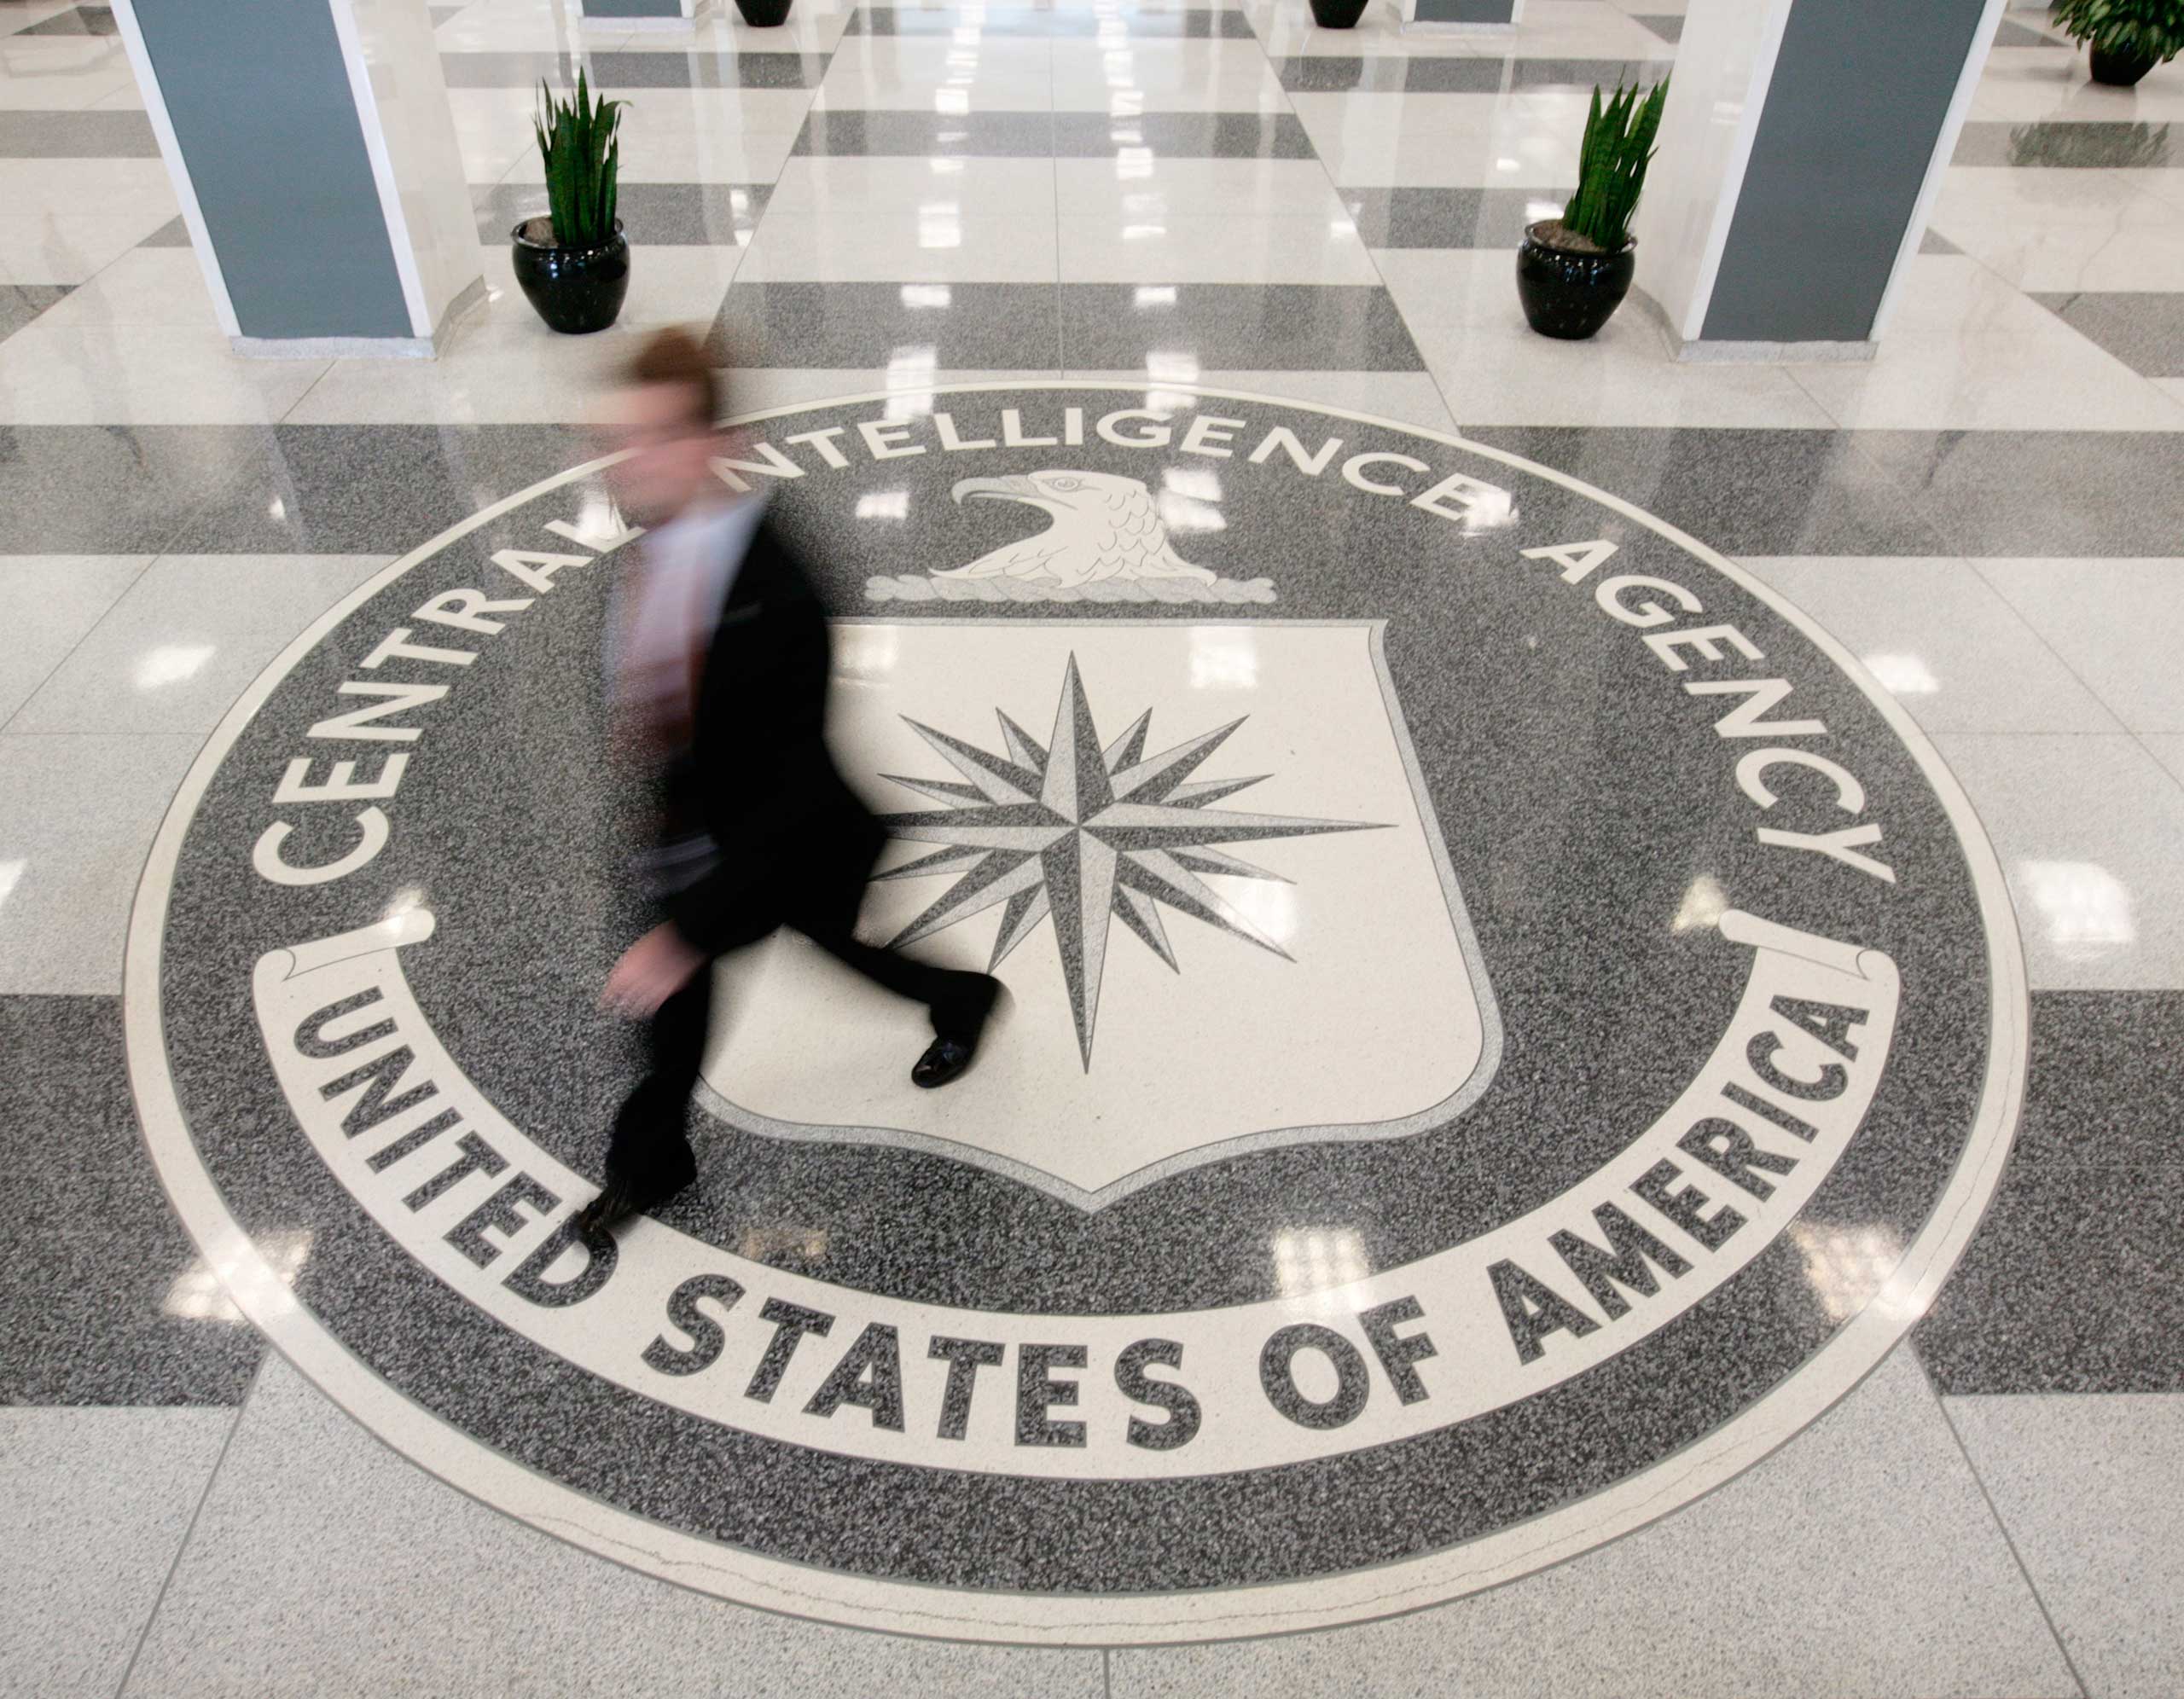 The lobby of the CIA Headquarters Building in McLean, Va. (Larry Downing—Reuters)